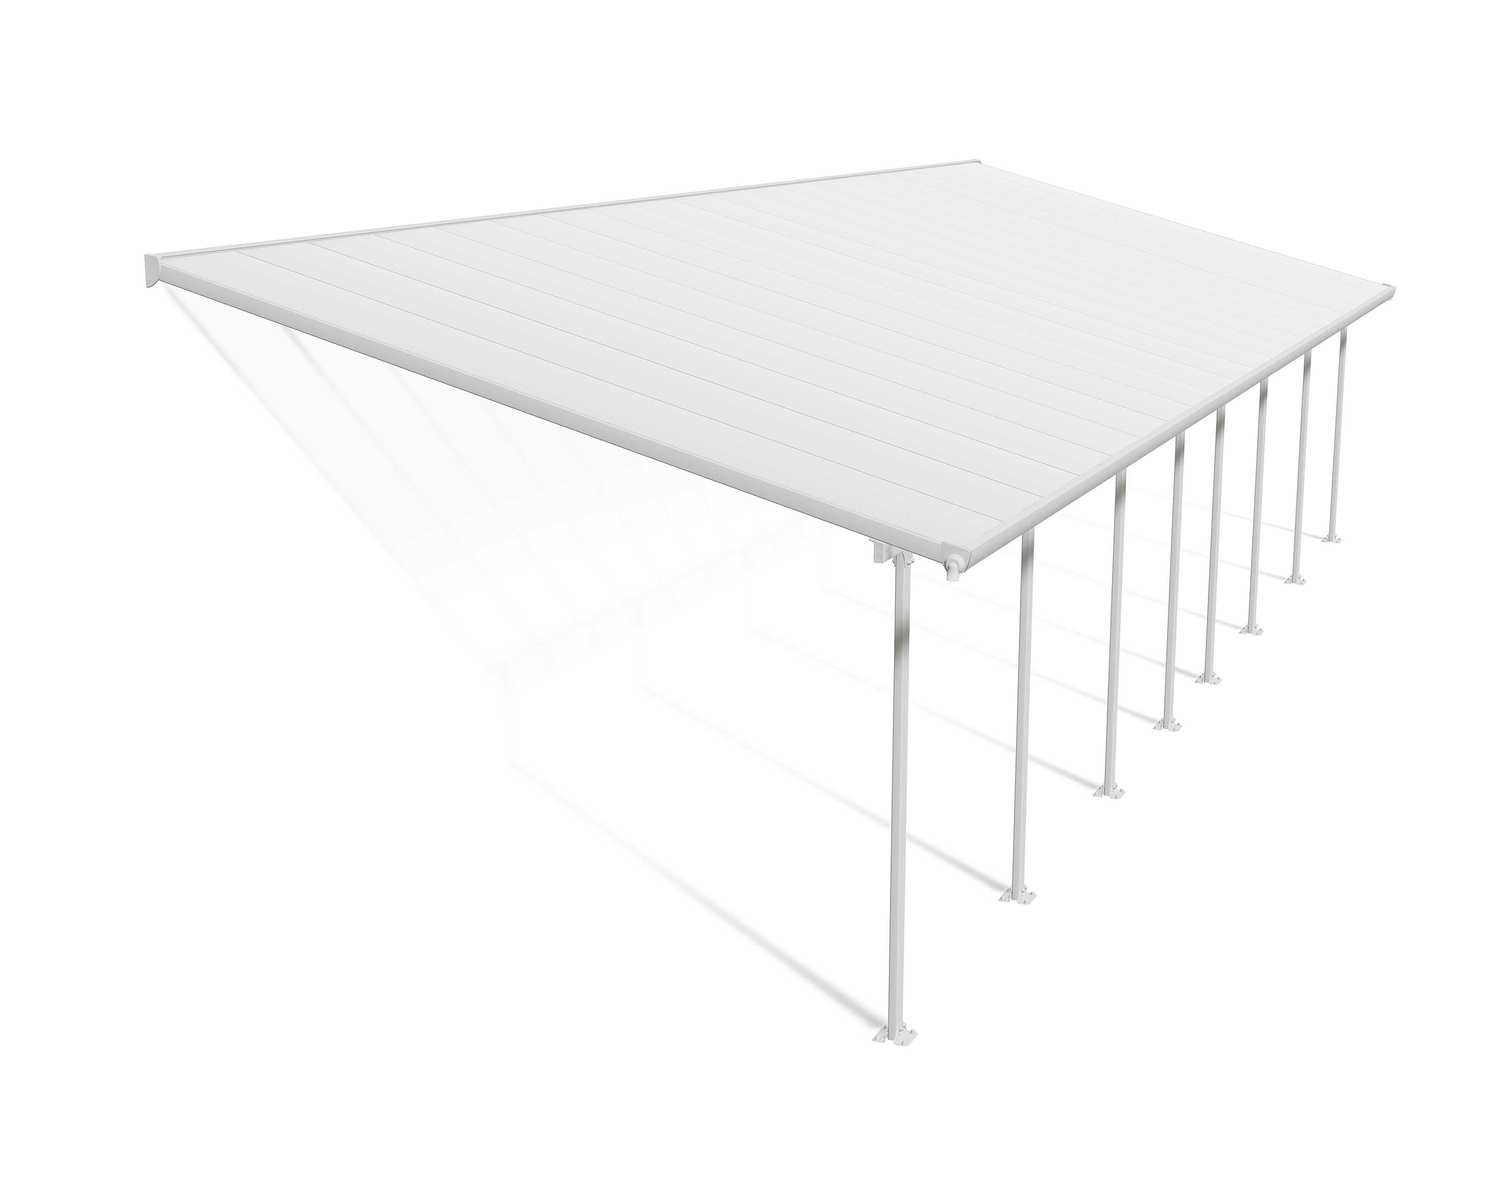 Feria 13 ft. x 40 ft. White Aluminium Patio Cover With 8 Posts, White Twin-Wall Polycarbonate Roof Panels.